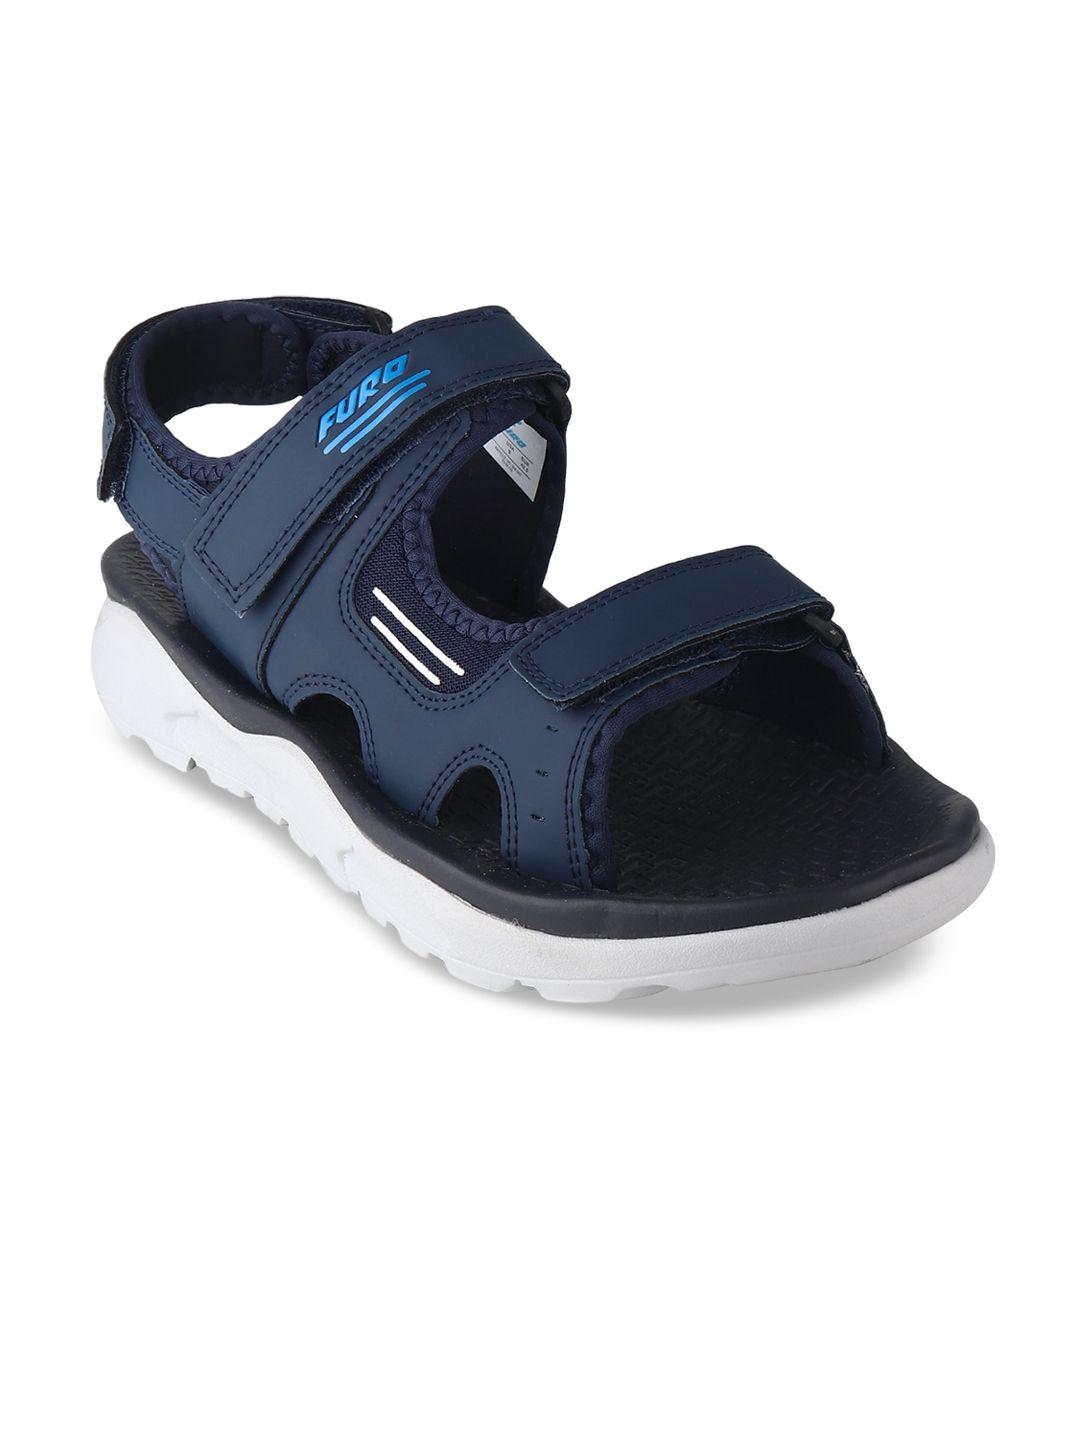 FURO by Red Chief Men Sports Sandals